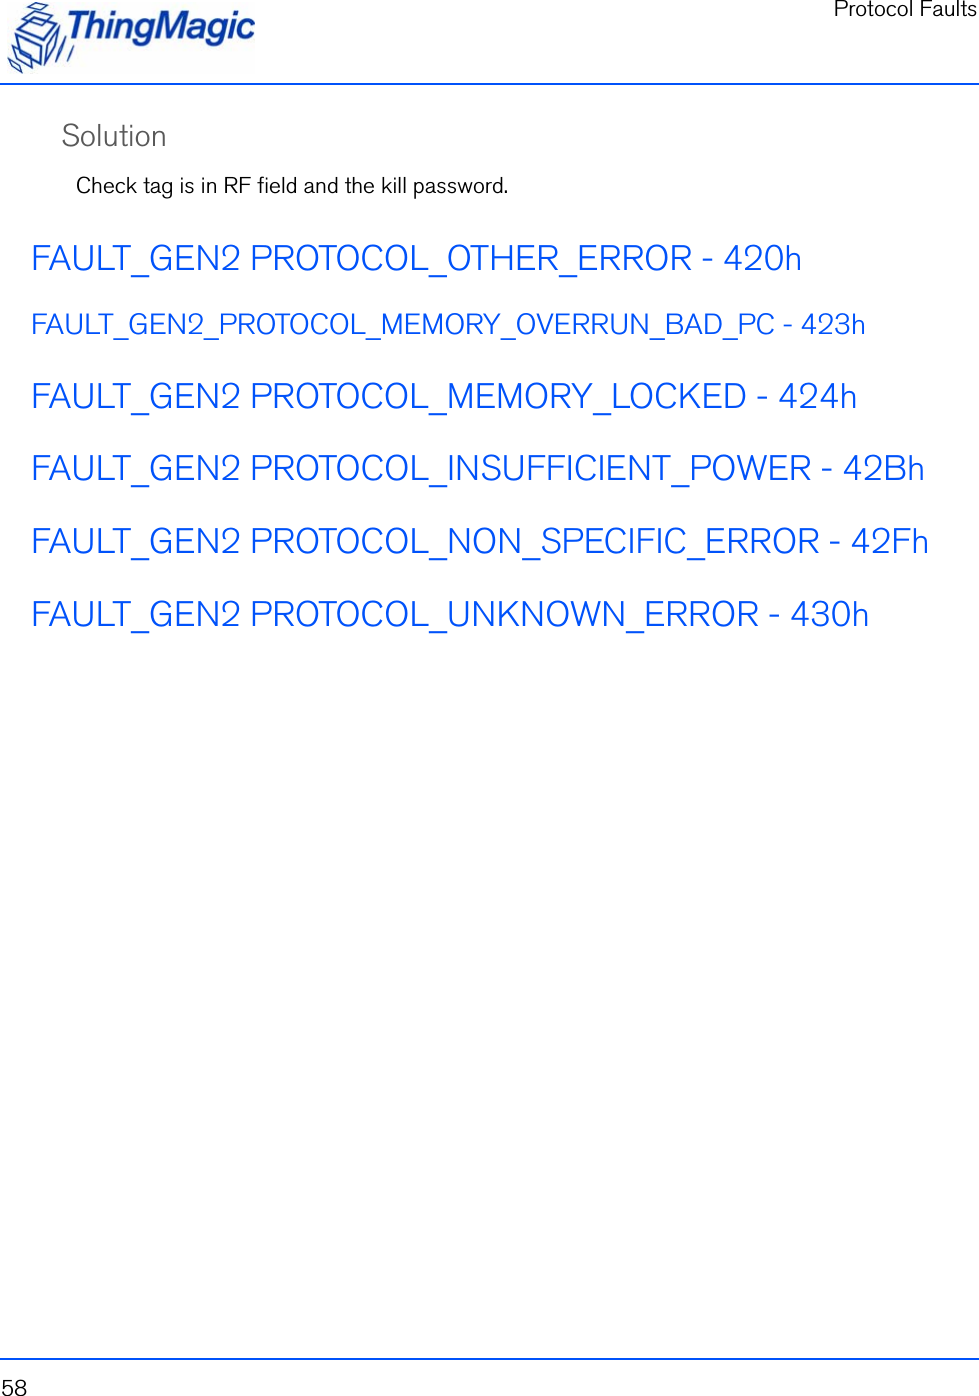 Protocol Faults58SolutionCheck tag is in RF field and the kill password.FAULT_GEN2 PROTOCOL_OTHER_ERROR - 420hFAULT_GEN2_PROTOCOL_MEMORY_OVERRUN_BAD_PC - 423hFAULT_GEN2 PROTOCOL_MEMORY_LOCKED - 424hFAULT_GEN2 PROTOCOL_INSUFFICIENT_POWER - 42BhFAULT_GEN2 PROTOCOL_NON_SPECIFIC_ERROR - 42FhFAULT_GEN2 PROTOCOL_UNKNOWN_ERROR - 430h